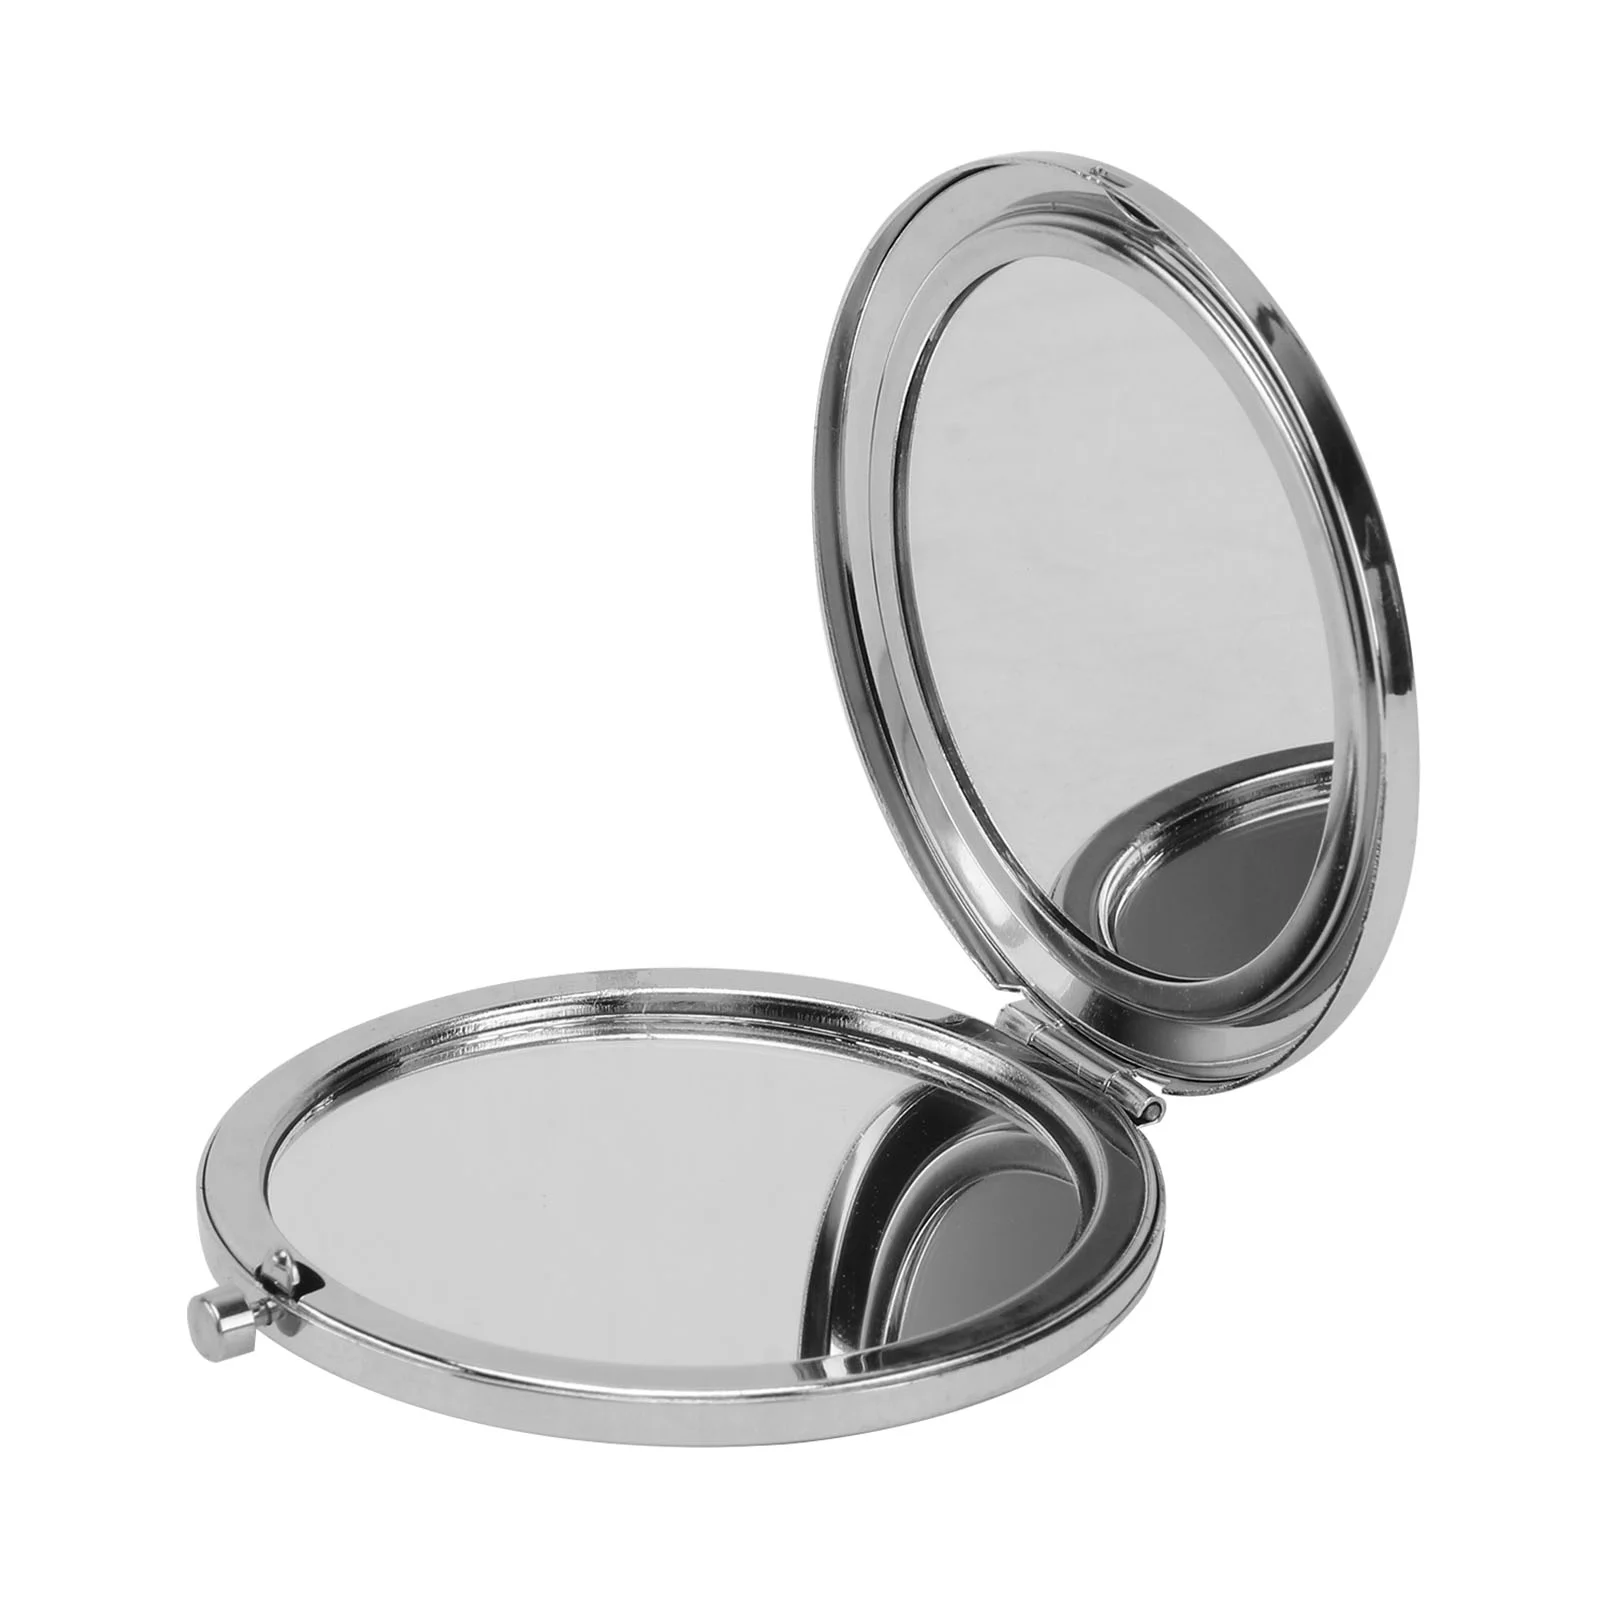 

Mirror Mini Compact Folding Double Sided Makeup Pocket Beauty Retro Floral Hand Round Traditional Metal Fold Up Vanity Foldable